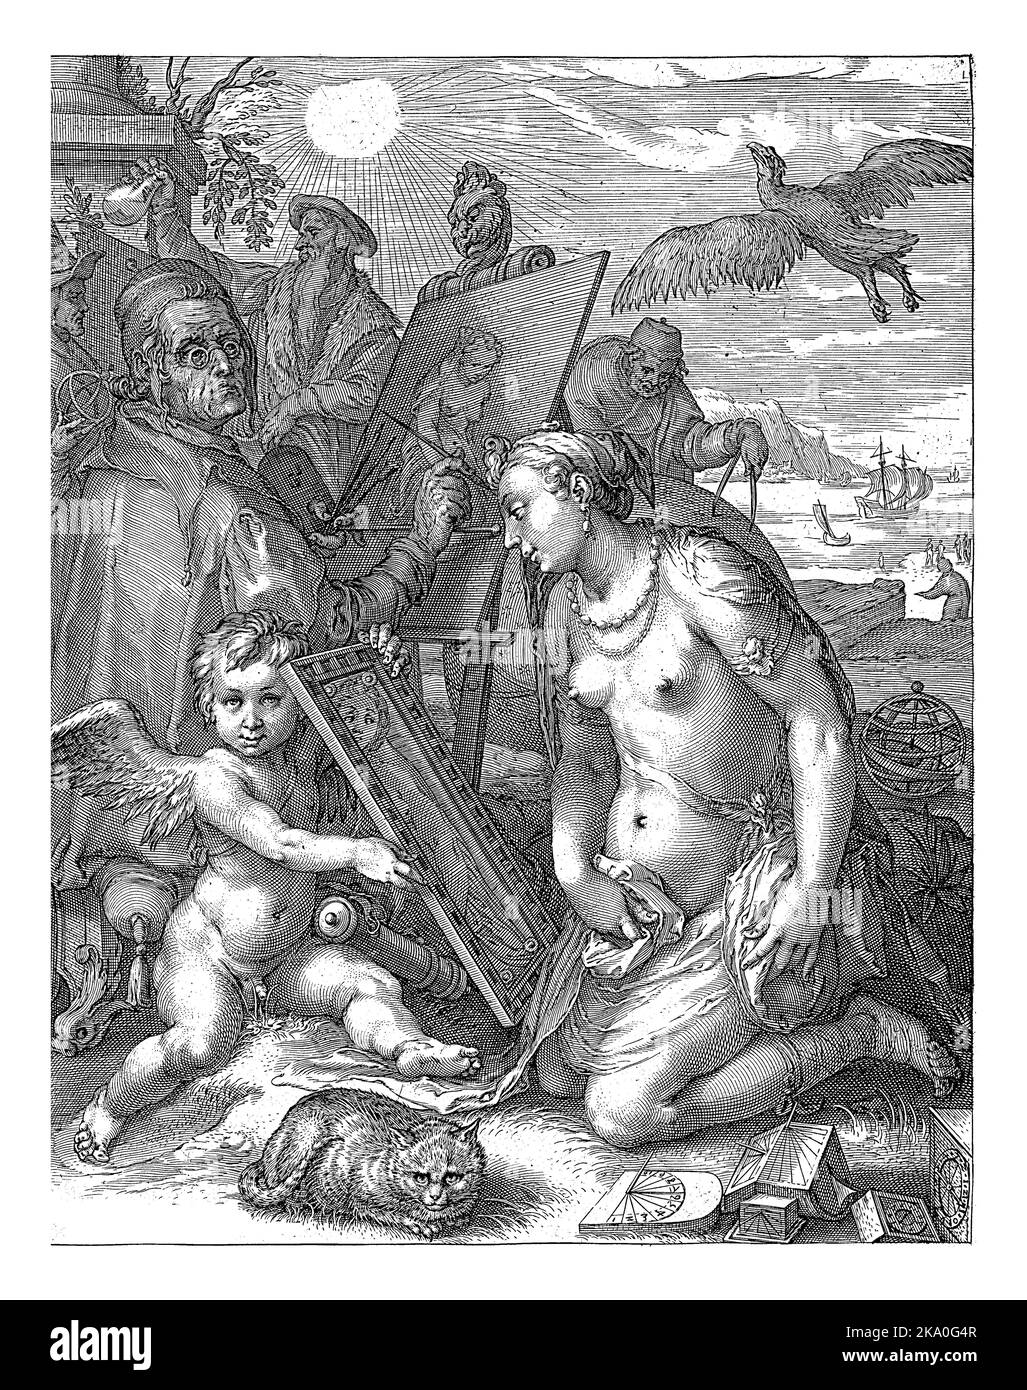 Allegory of perception, Jan Saenredam, after Hendrick Goltzius, 1616 An artist wearing glasses paints a naked woman in the open air. Stock Photo